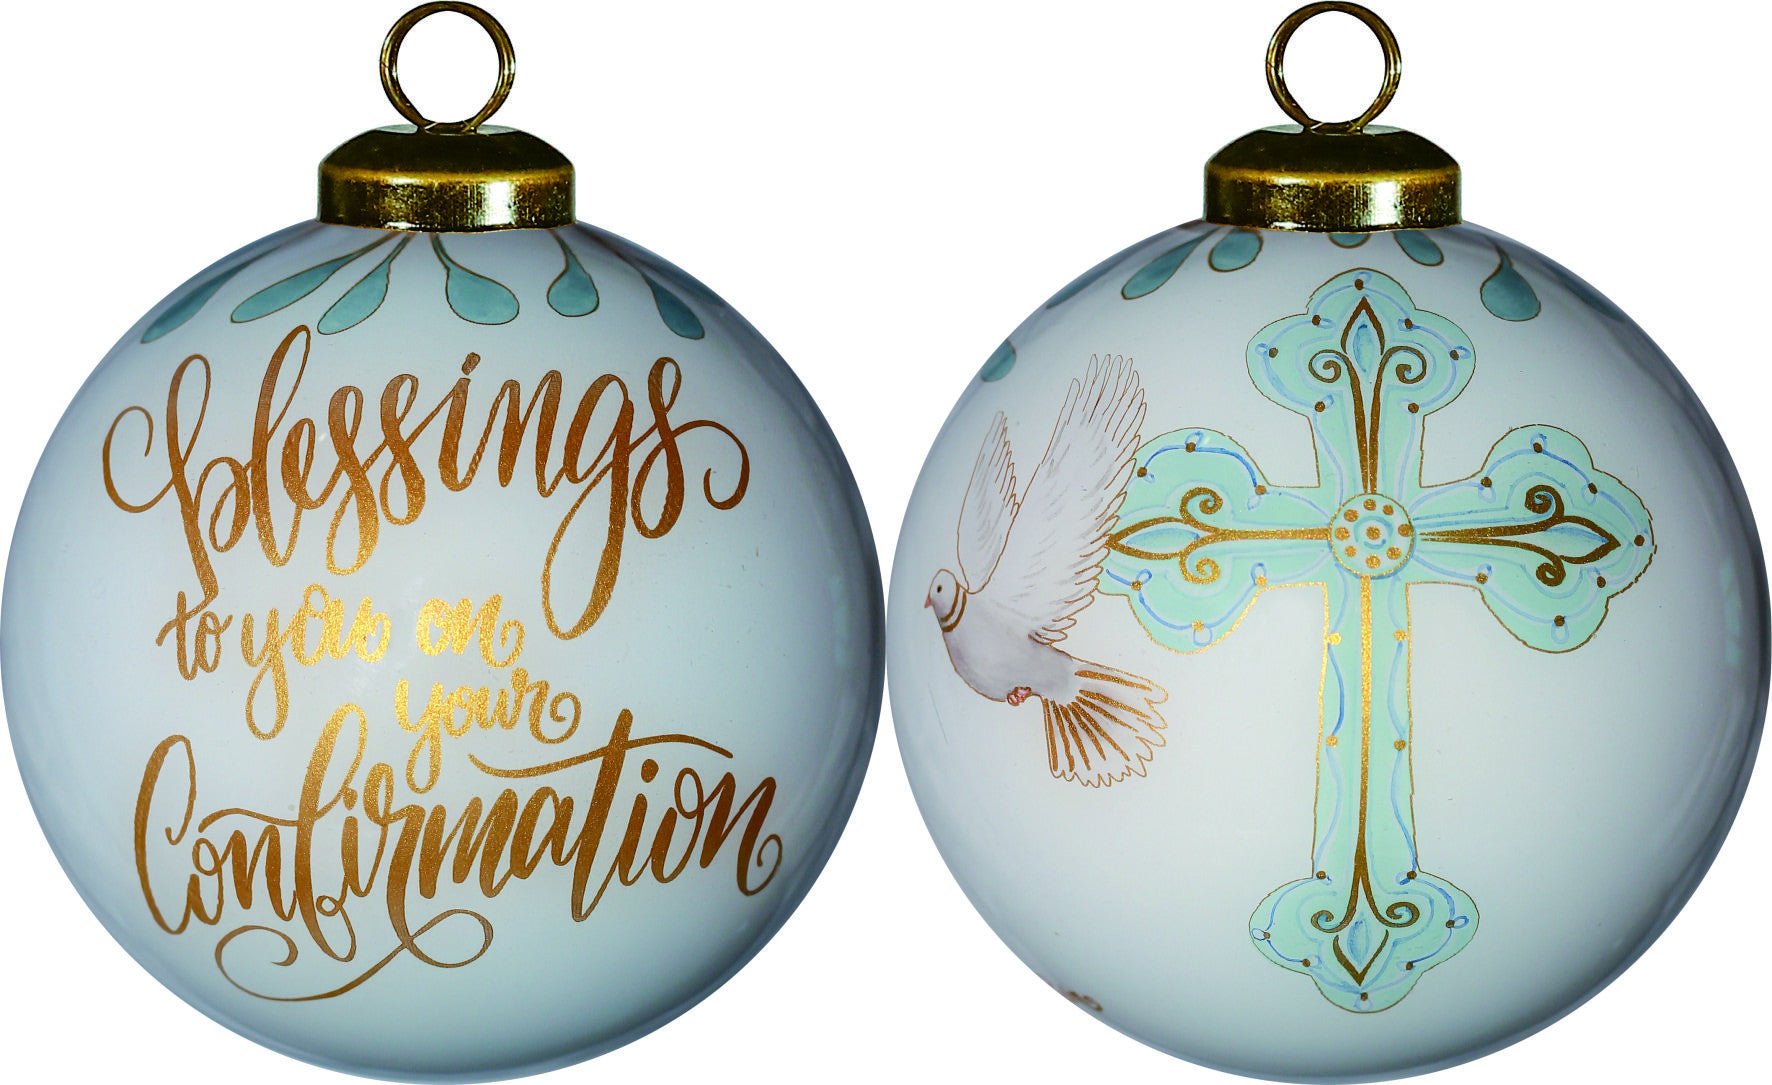 Gold-Confirmation-Hand-Painted-Mouth-Blown-Glass-Ornament-Christmas-Ornaments